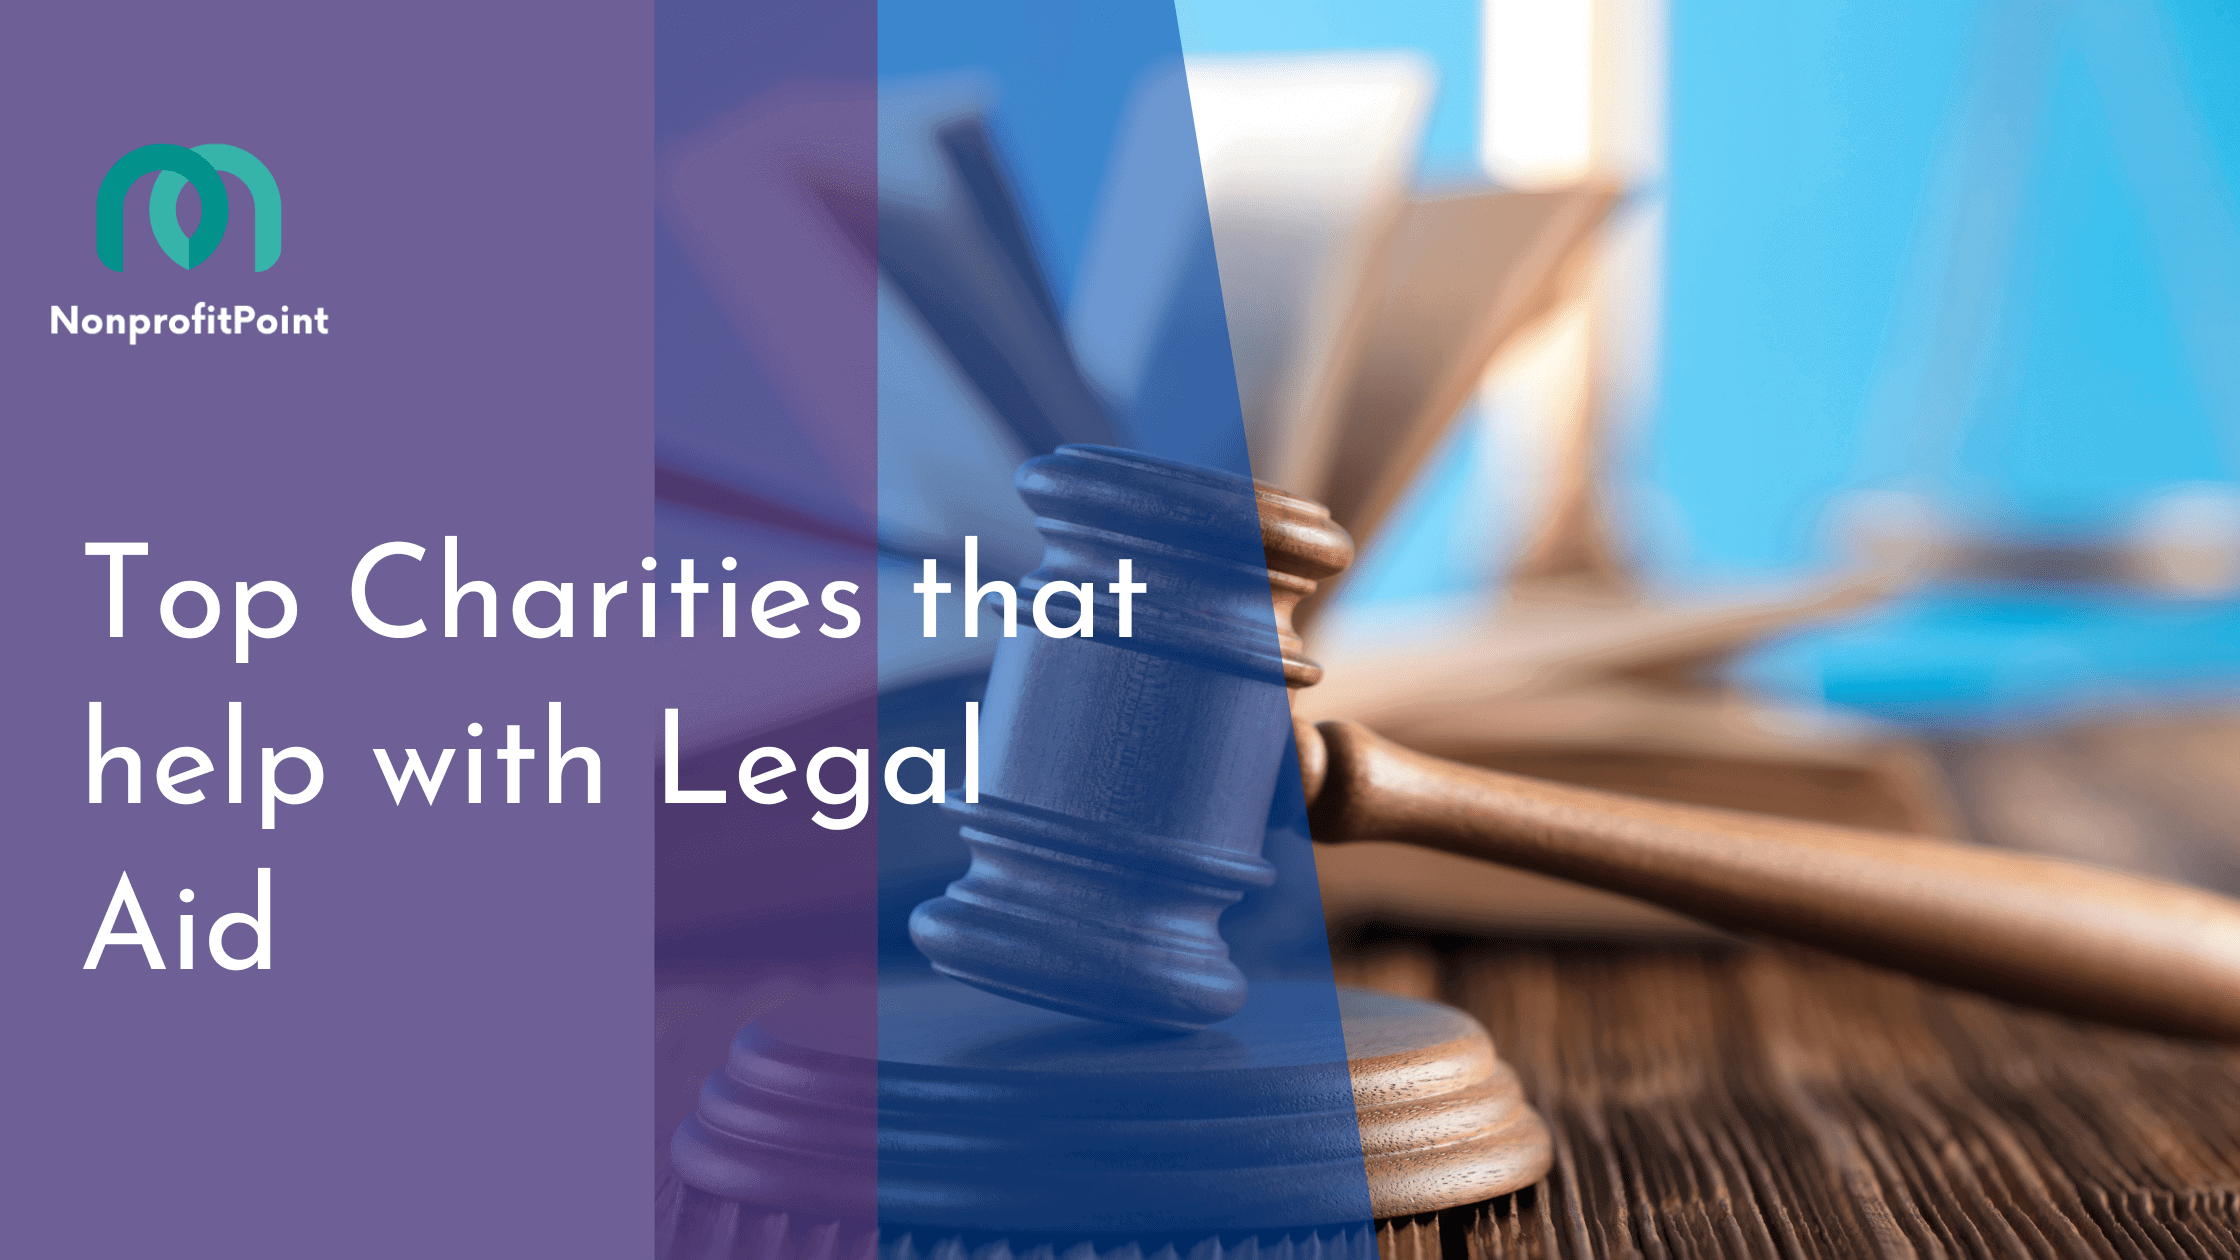 Top Charities that help with Legal Aid